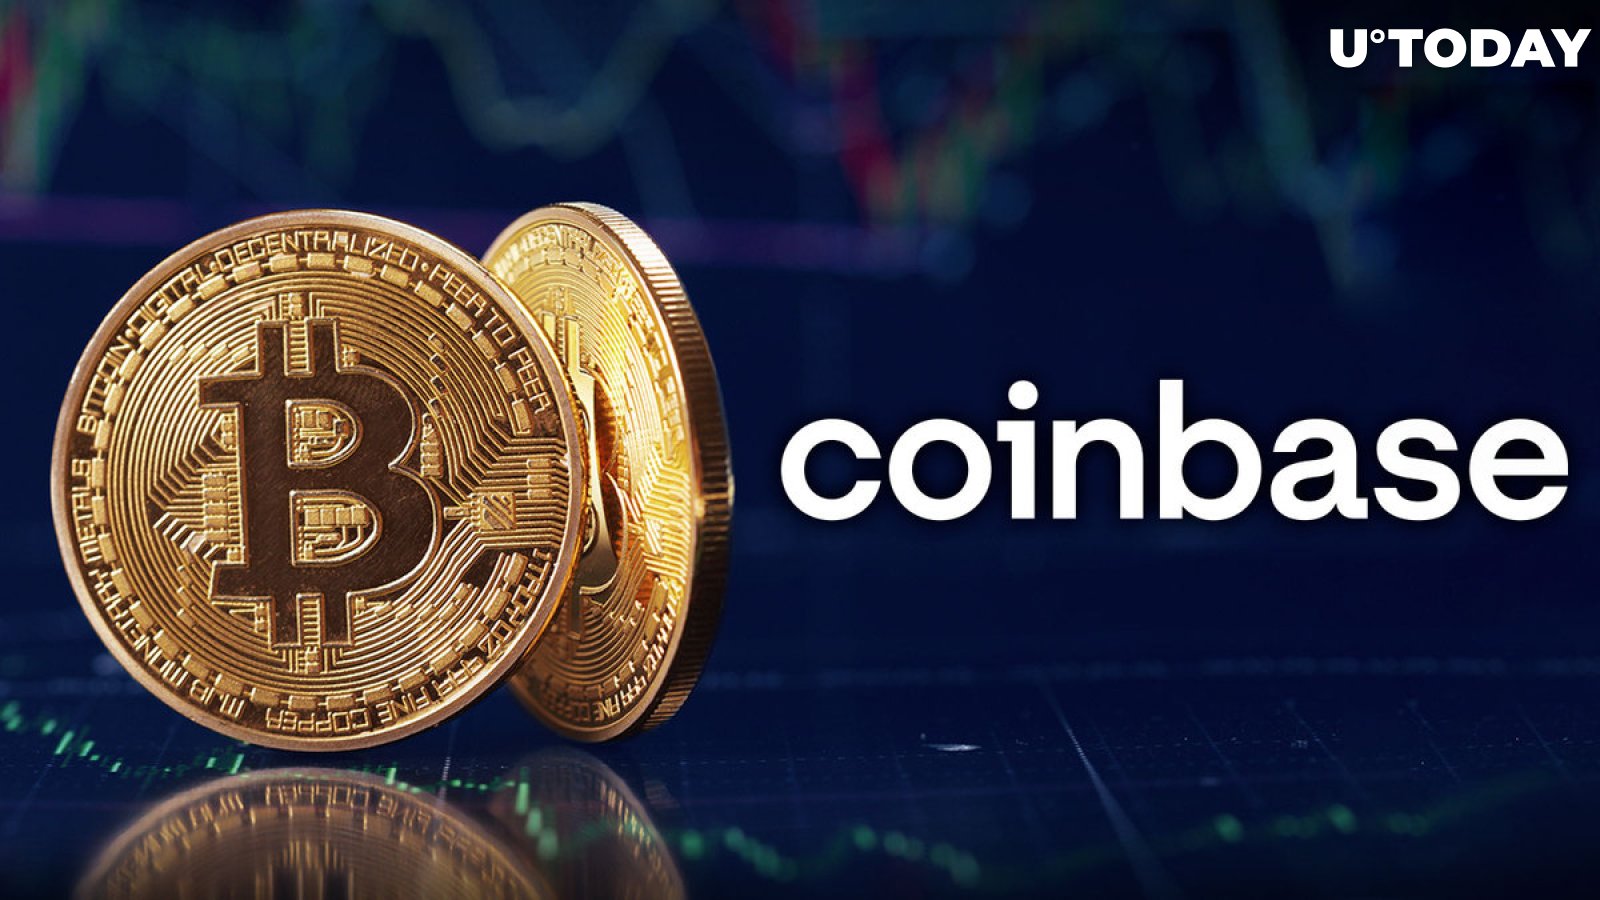 Bitcoin (BTC) Reaches ATH on Coinbase: It's More Important Than Price